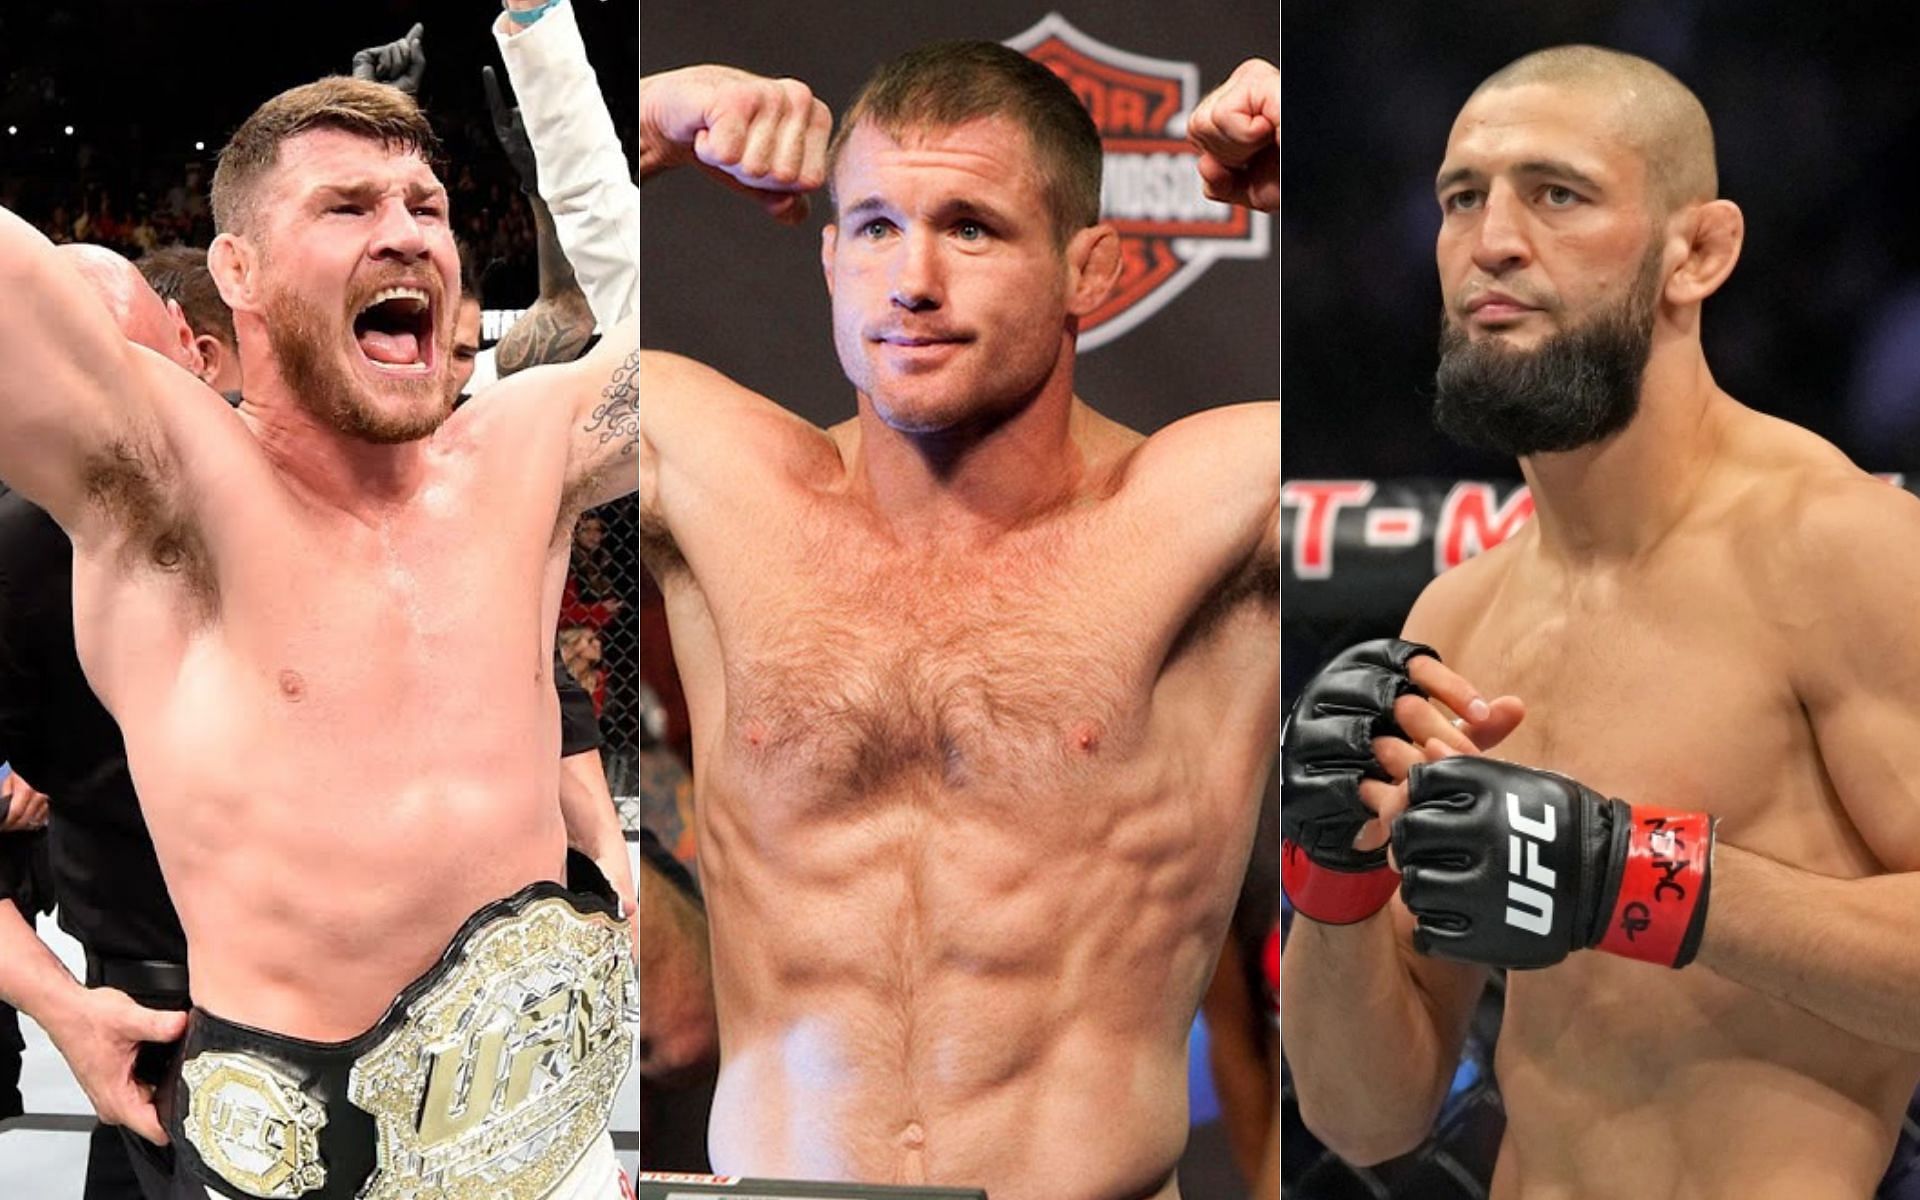 Michael Bisping, Matt Hughes and Khamzat Chimaev were all turned into heels by the fans